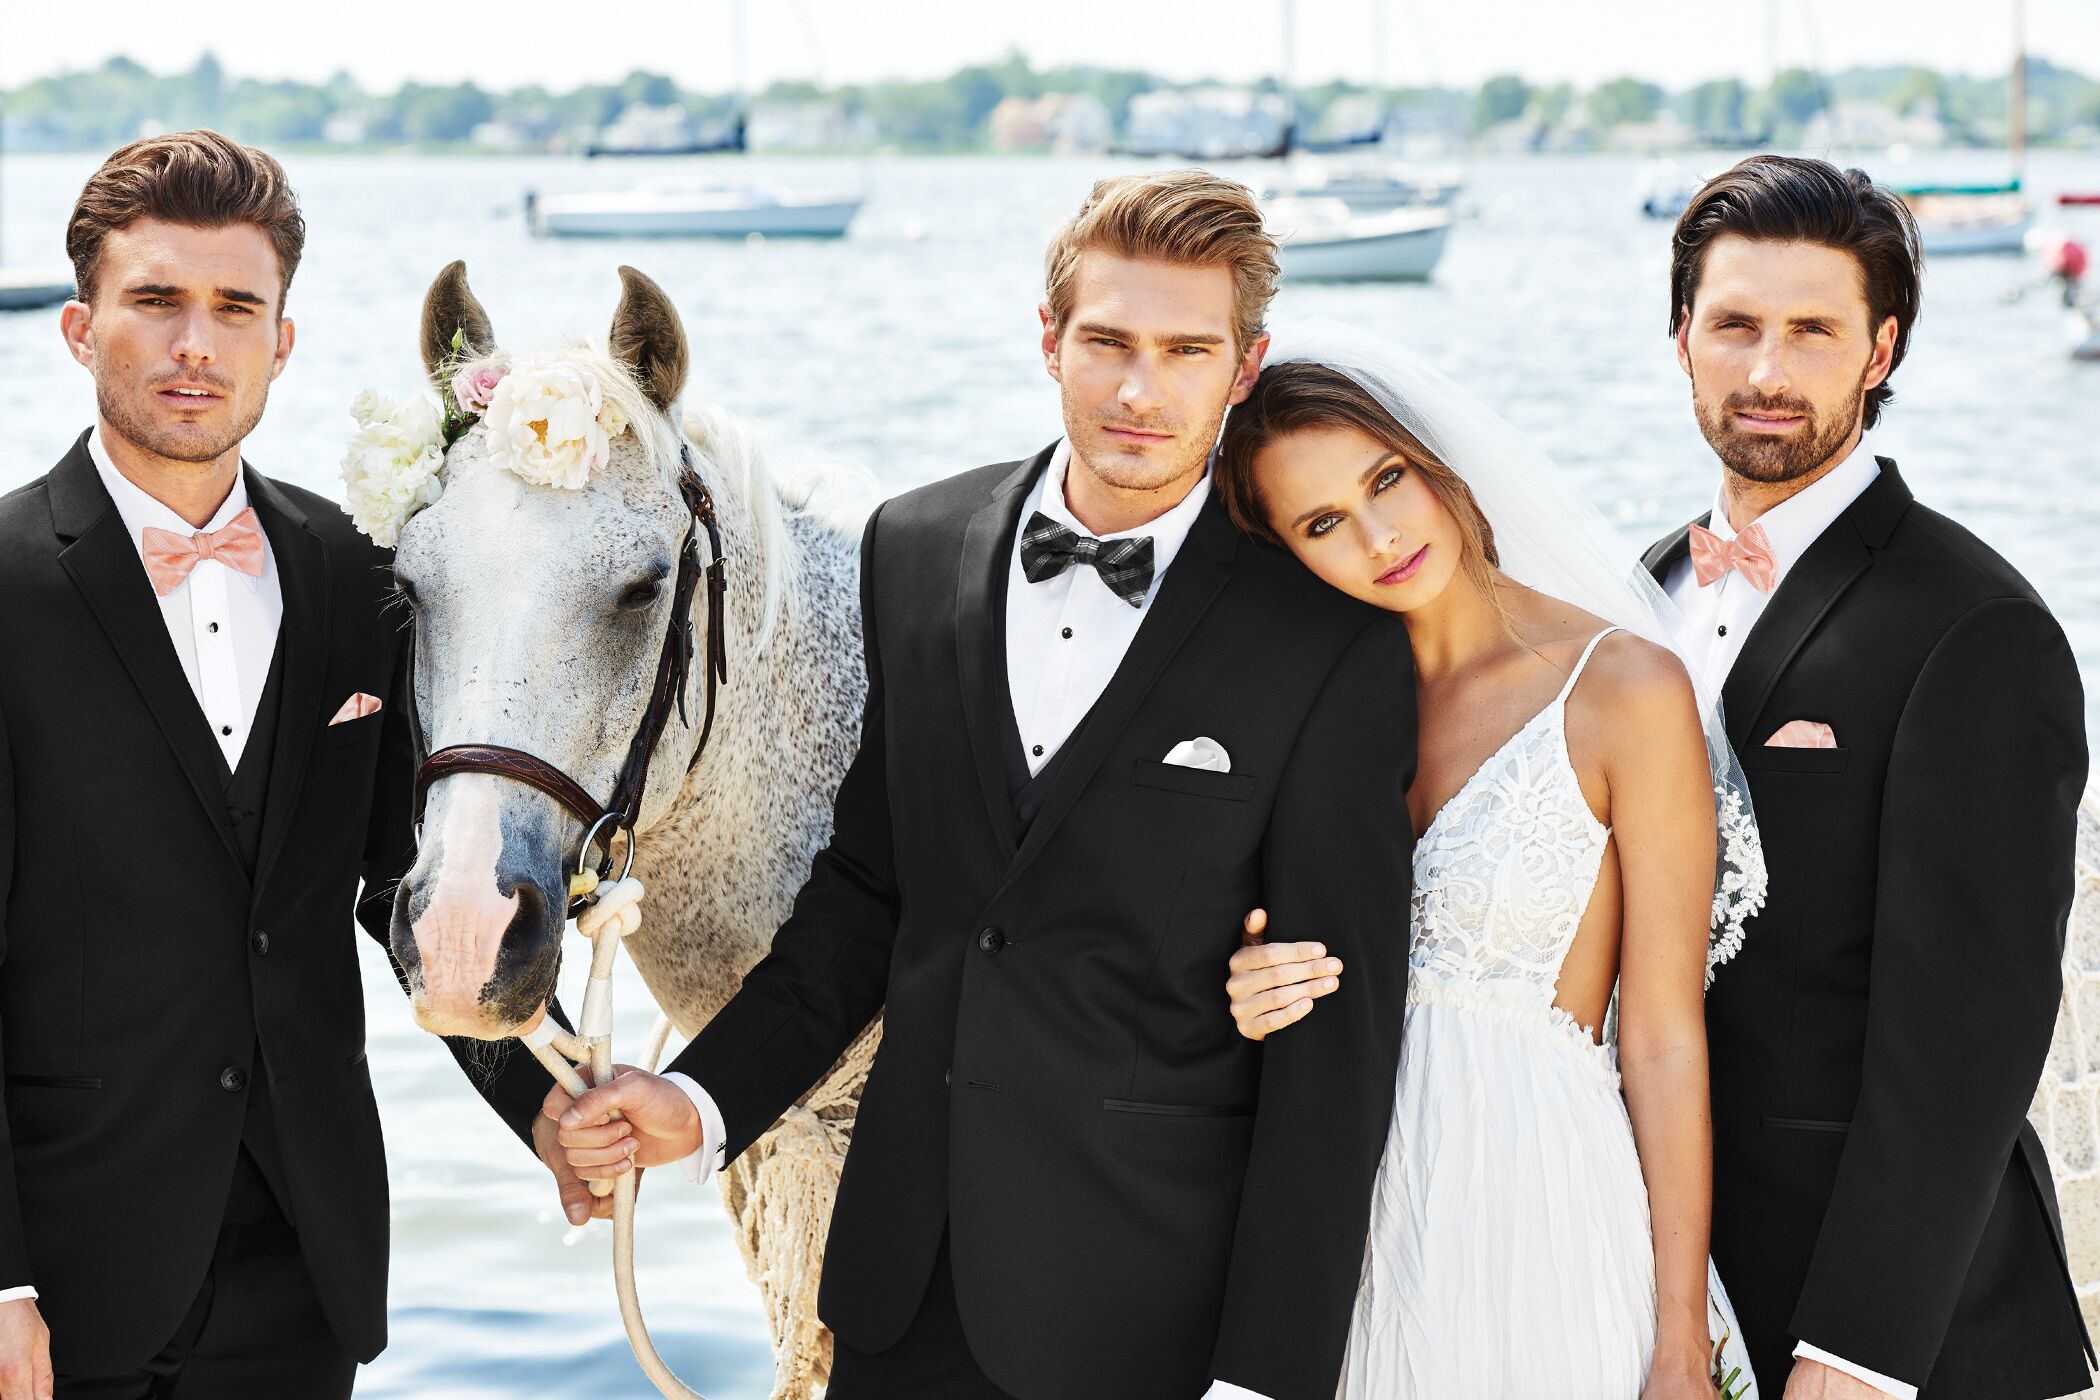 Alvin Tuxedos | Bridal Salons - The Knot